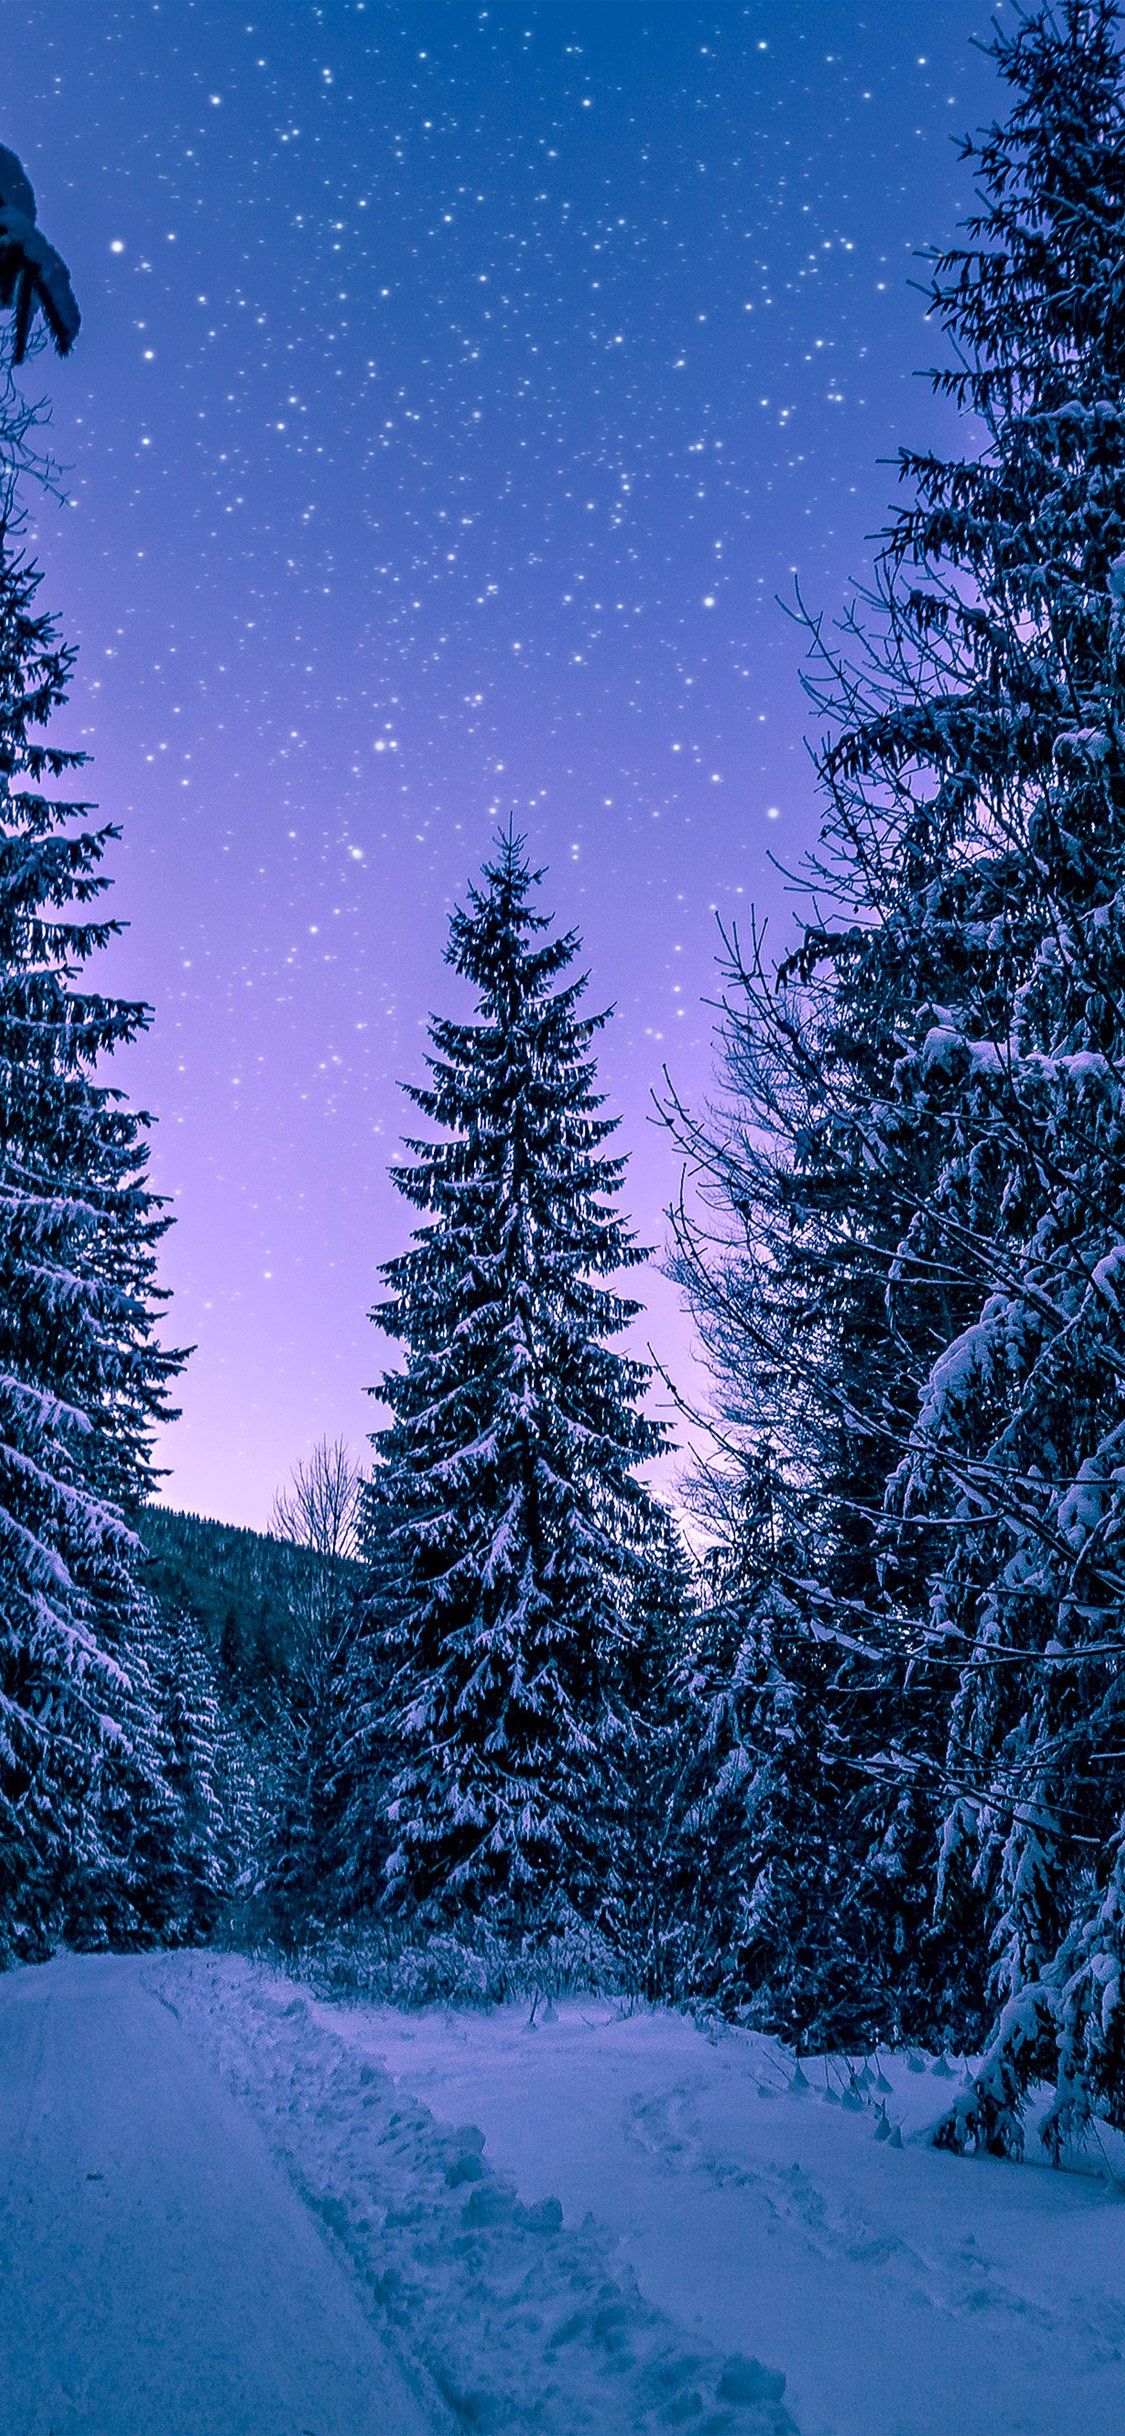 Winter Mountains Snow Forest Trees iPhone Wallpaper